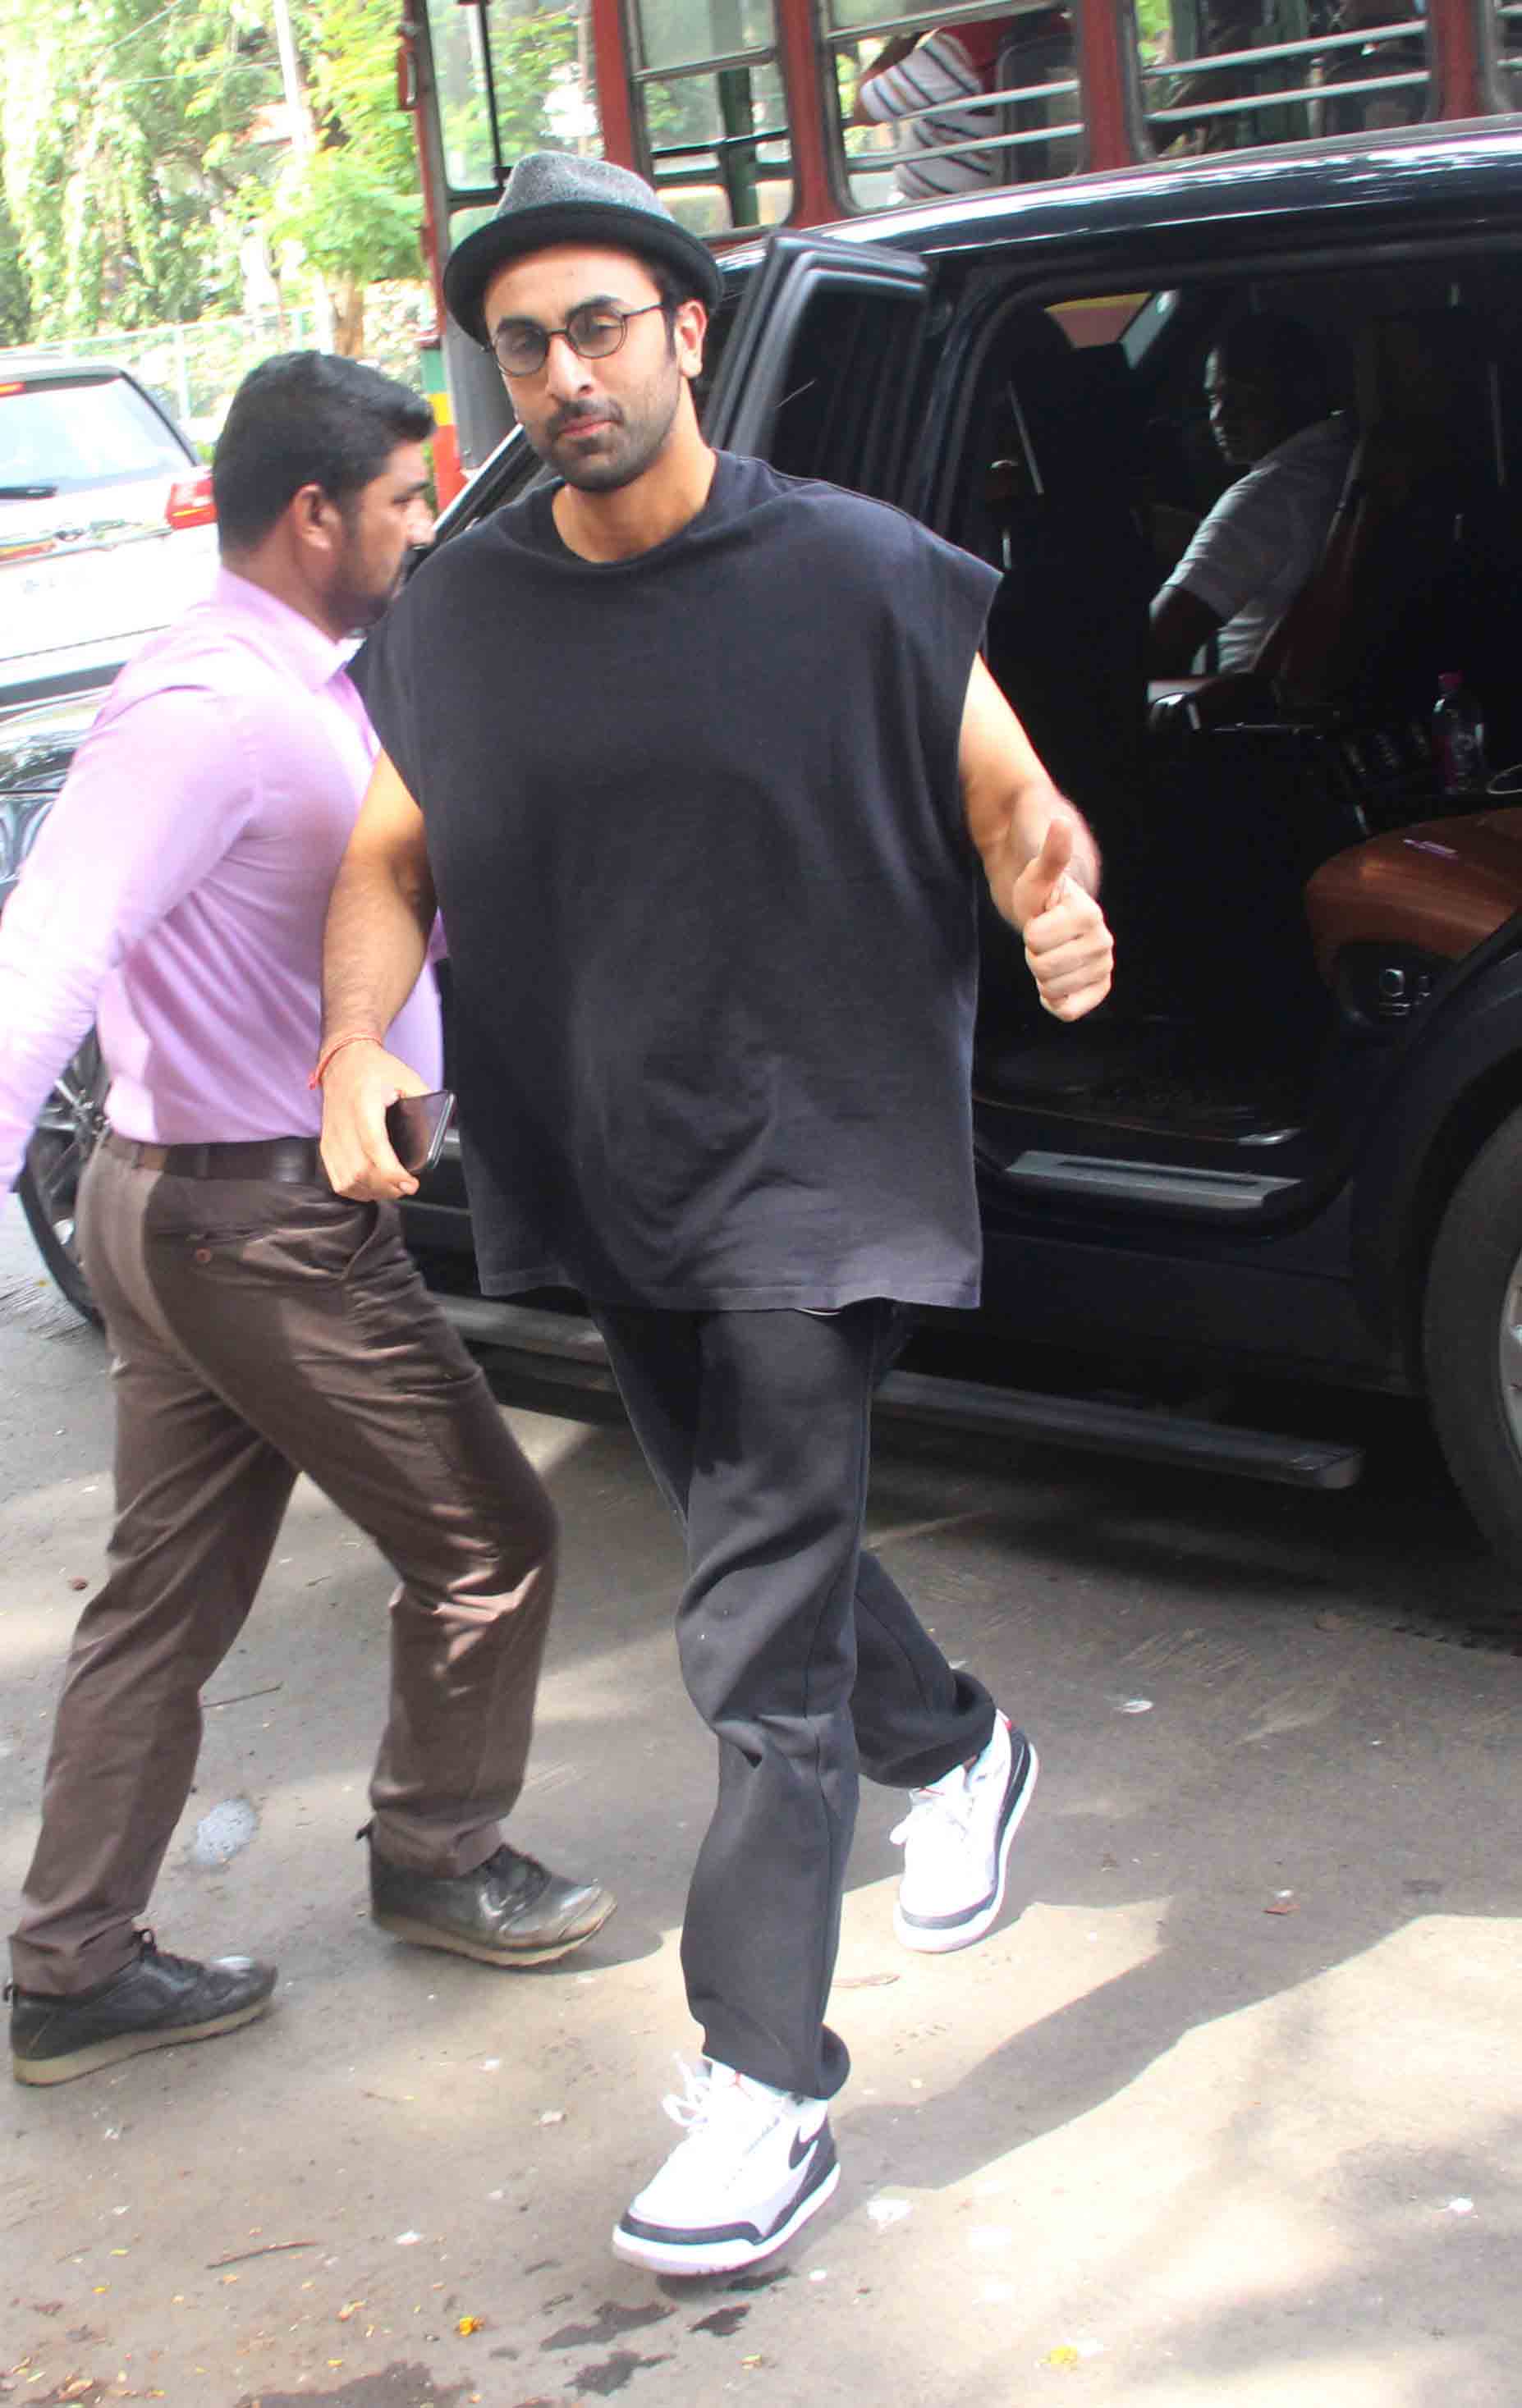 Ranbir Kapoor looks Uber cool in a beard as he gets spotted at t-series  office today. 💙 #RanbirKapoor